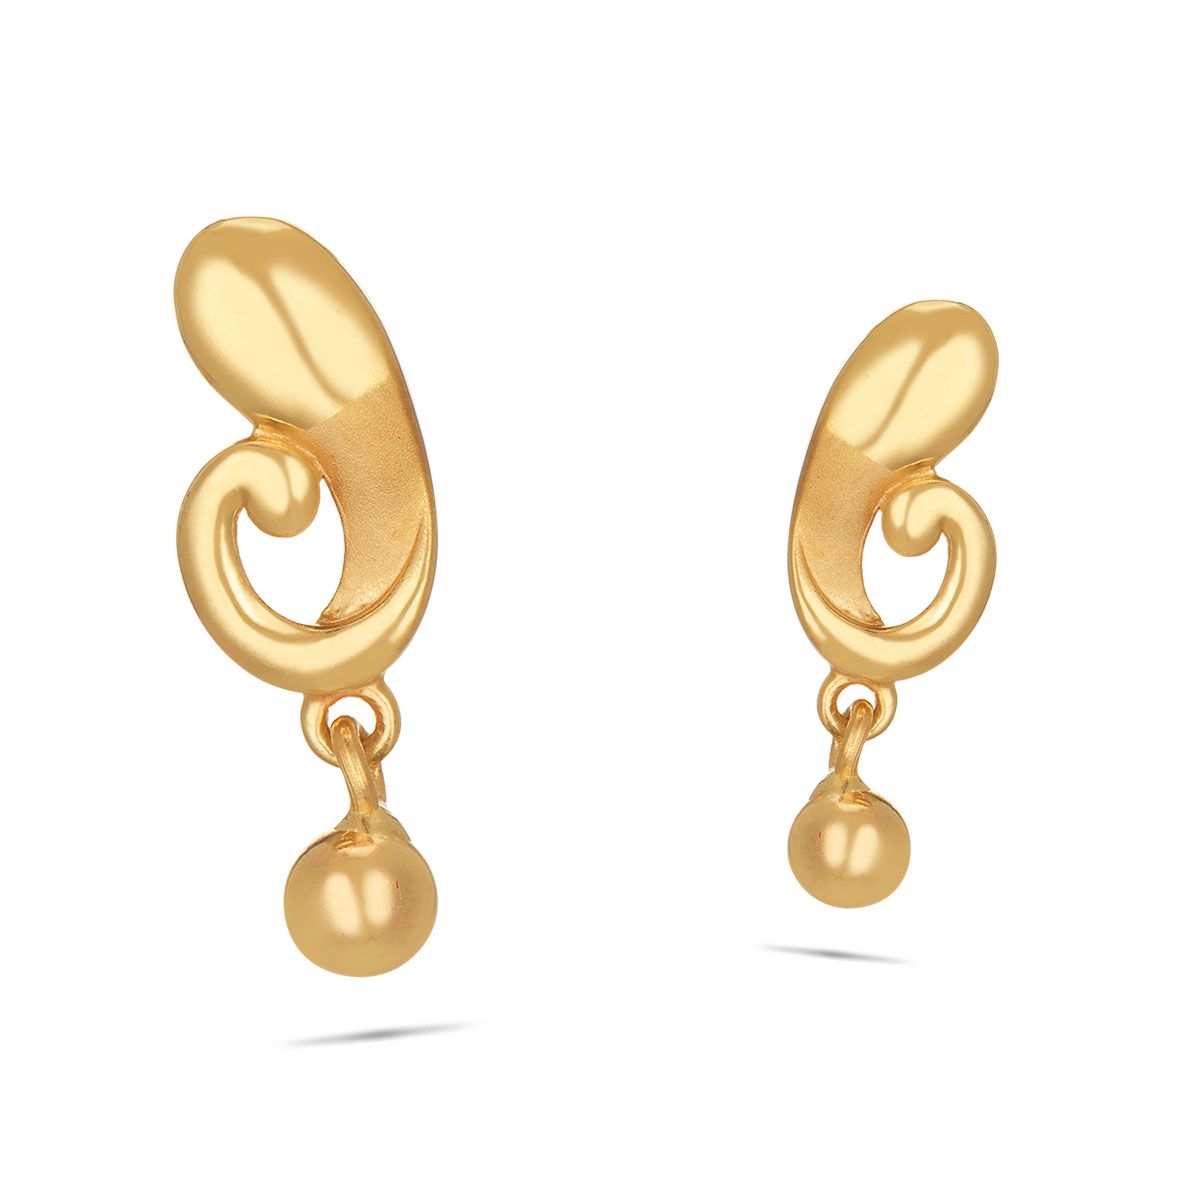 light weight gold earrings with price/gold earrings for baby girls with  Price/earrings for kids - YouTube